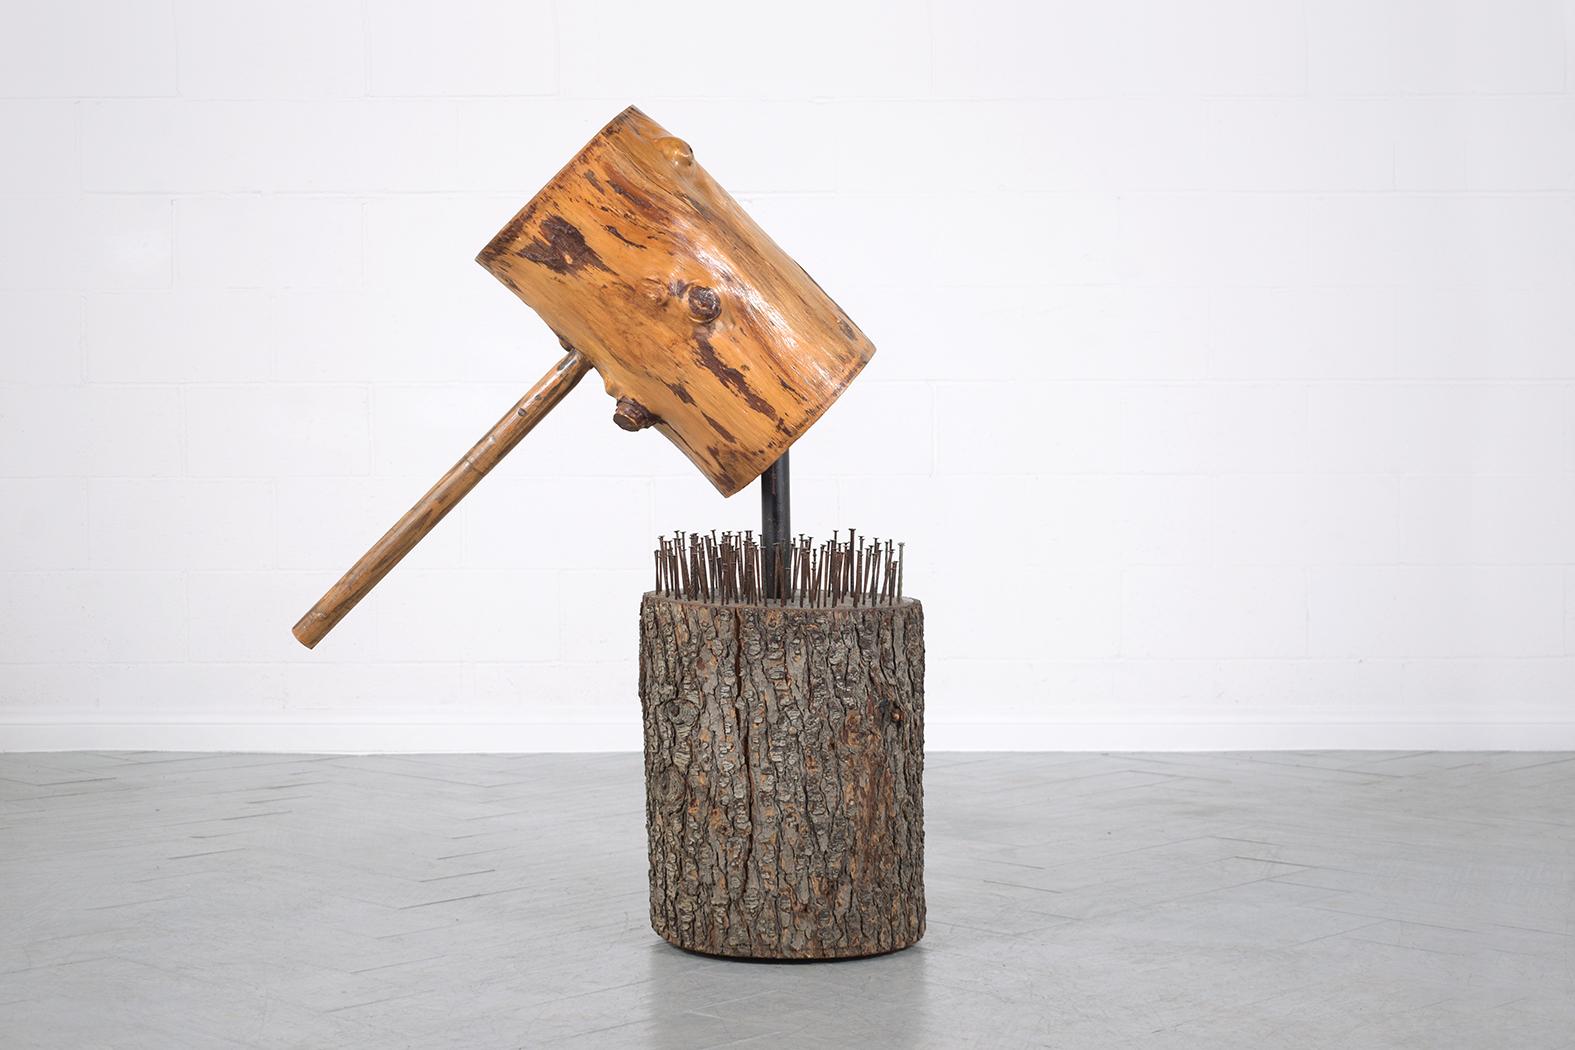 Discover our extraordinary 1950s organic modern sculpture, meticulously crafted from wood and in good condition, ready to enhance your space for years to come. This eye-catching piece features a floating hammer, stained in a natural color, waxed,